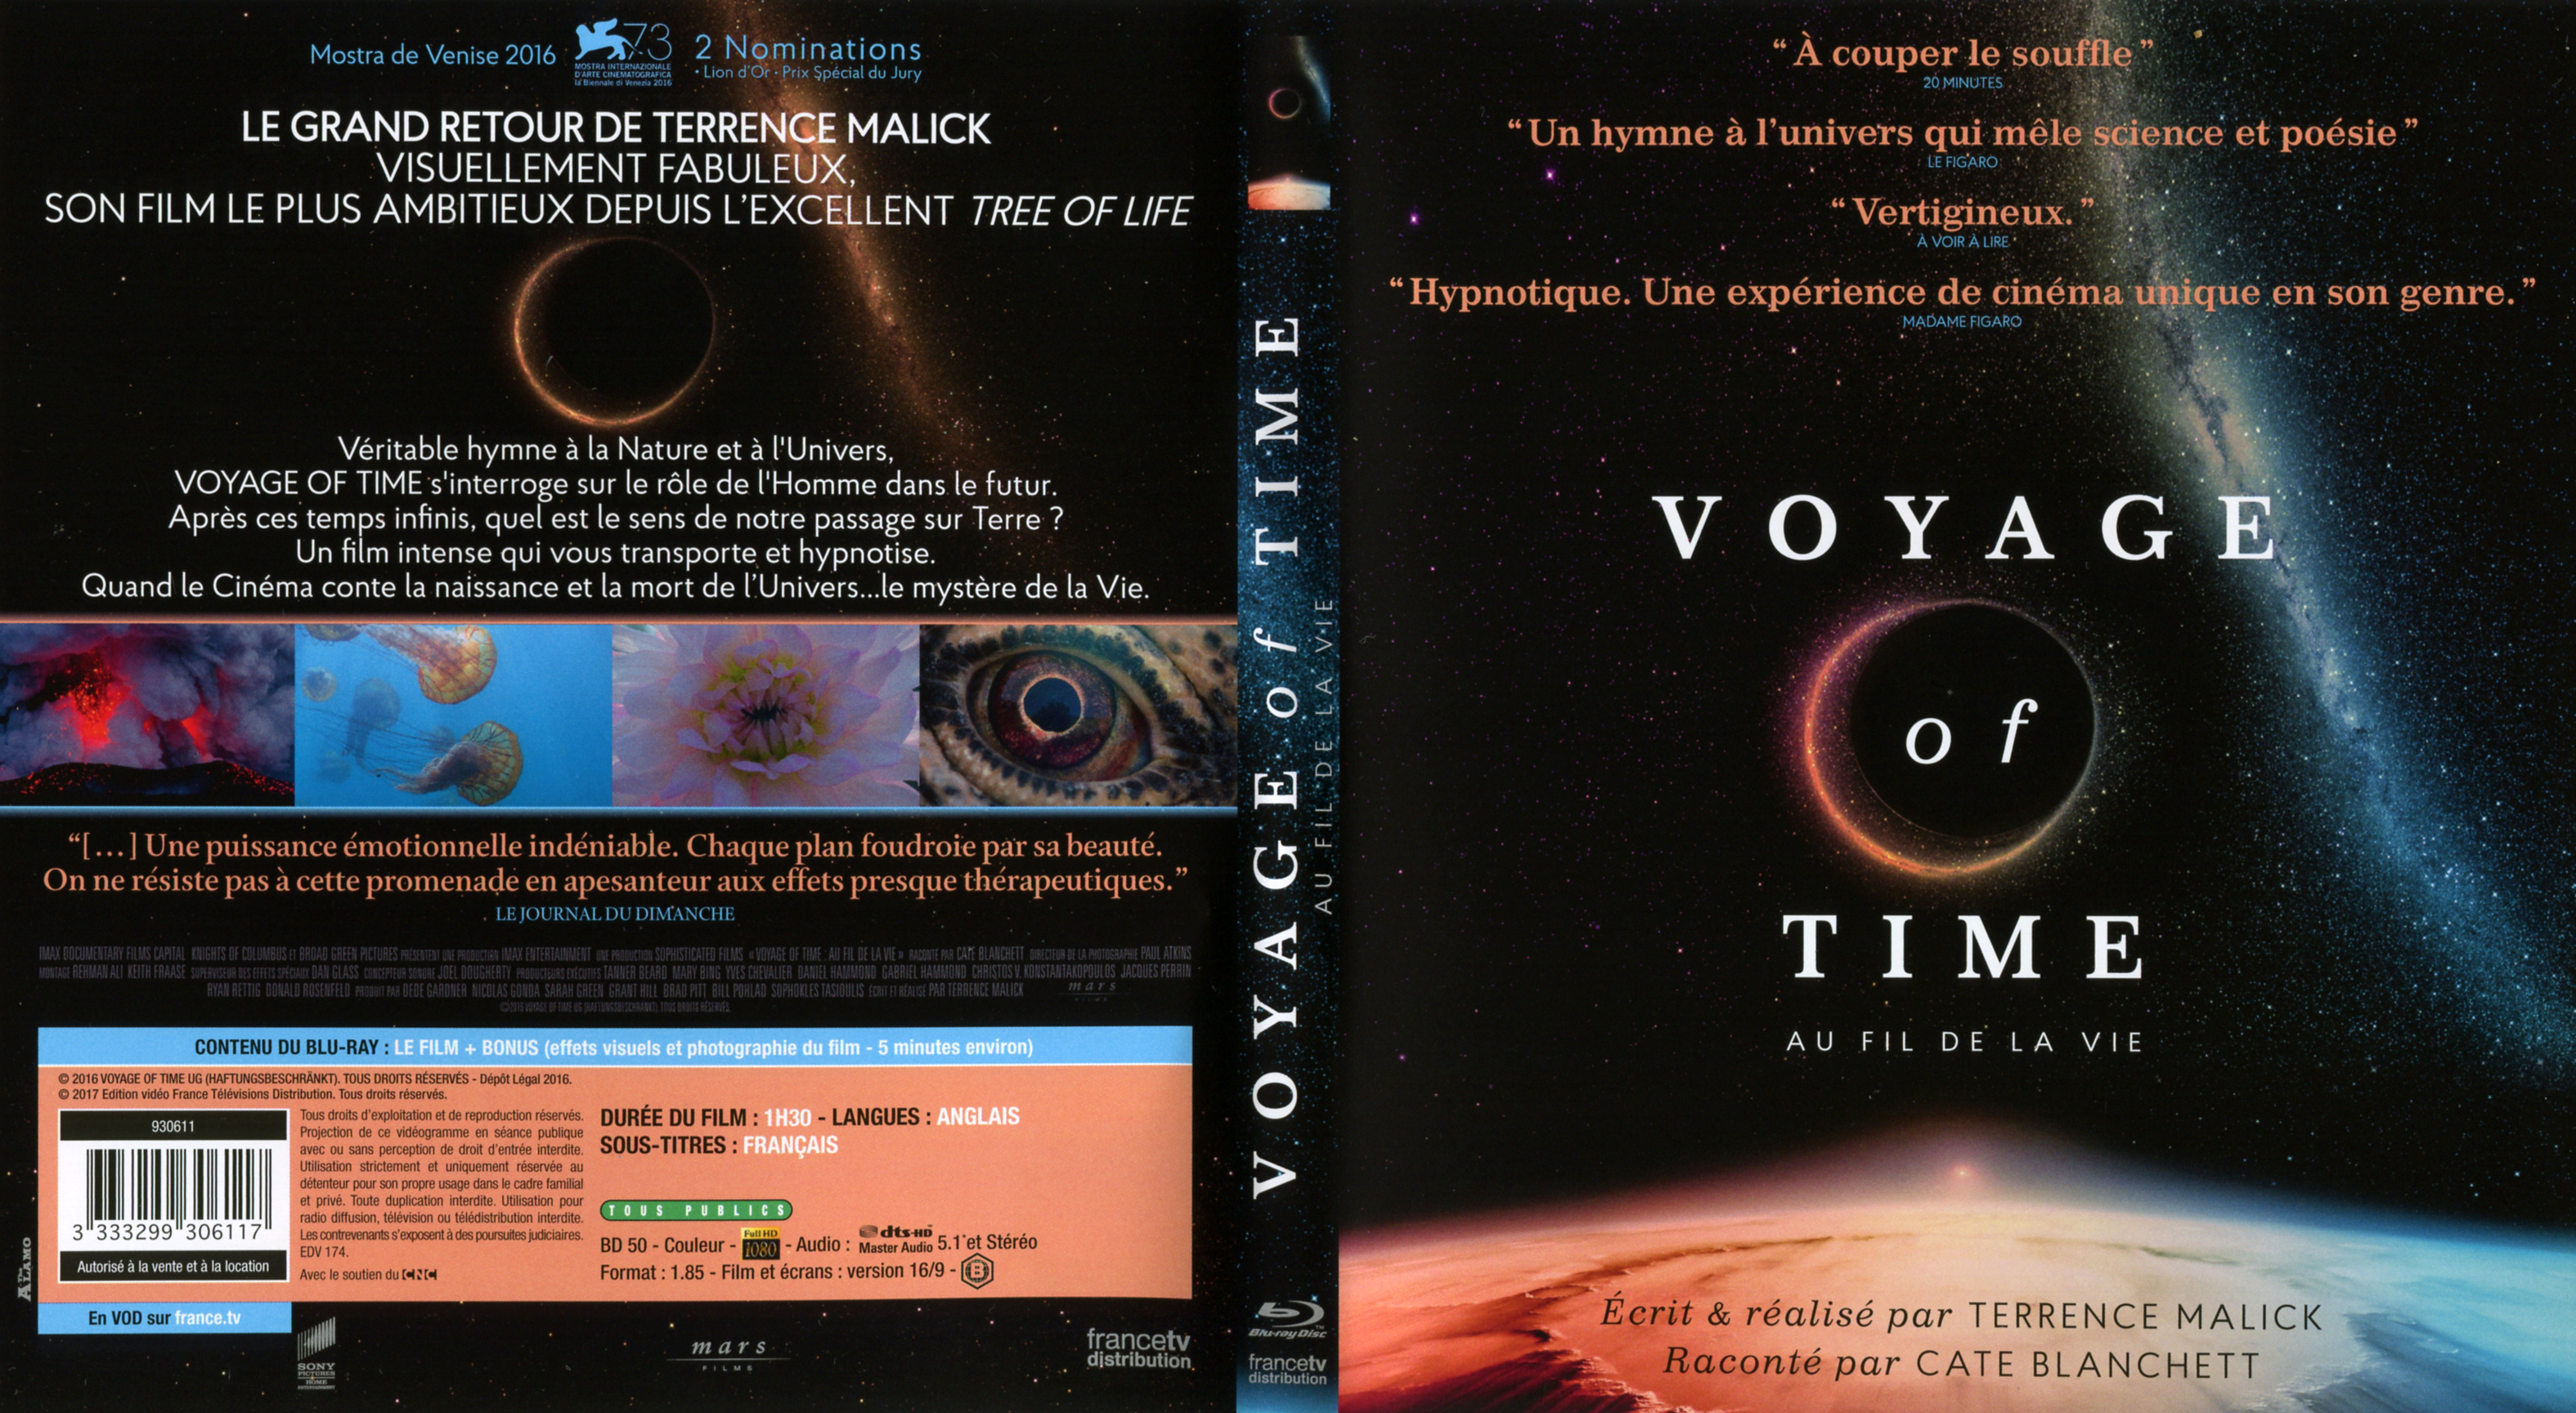 Jaquette DVD Voyage of time (BLU-RAY)